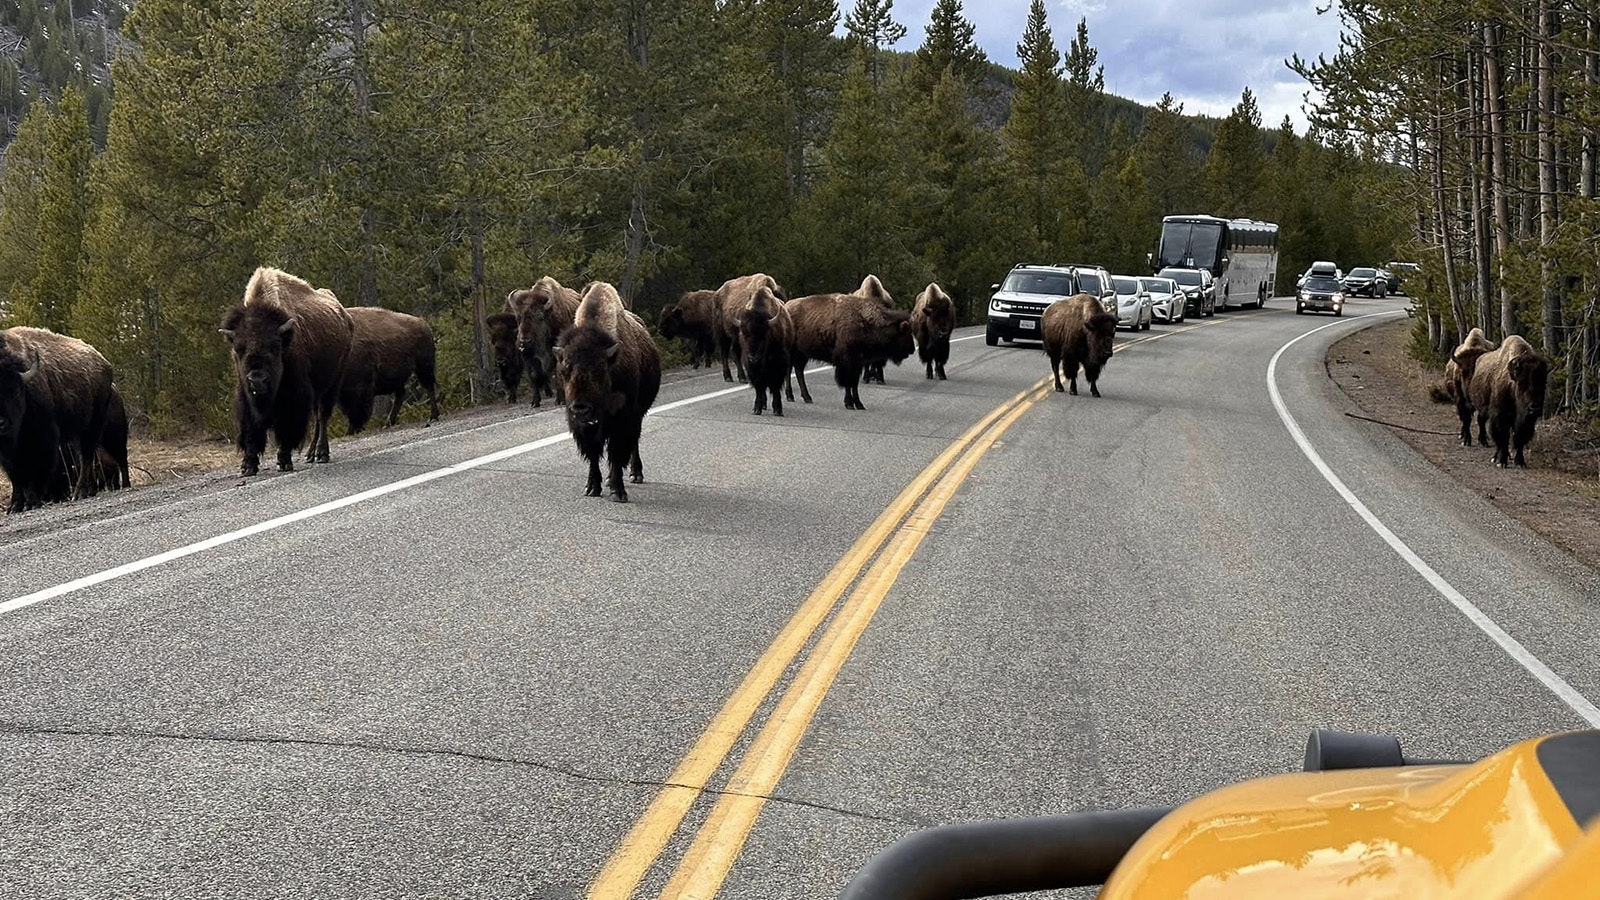 Rhea Cicale, a top contributor to the popular Facebook page Yellowstone National Park: Invasion of the Idots posted these photos Sunday of a Blustar tour bus crossing into the wrong lane of travel to push ahead through a bison jam in the park.